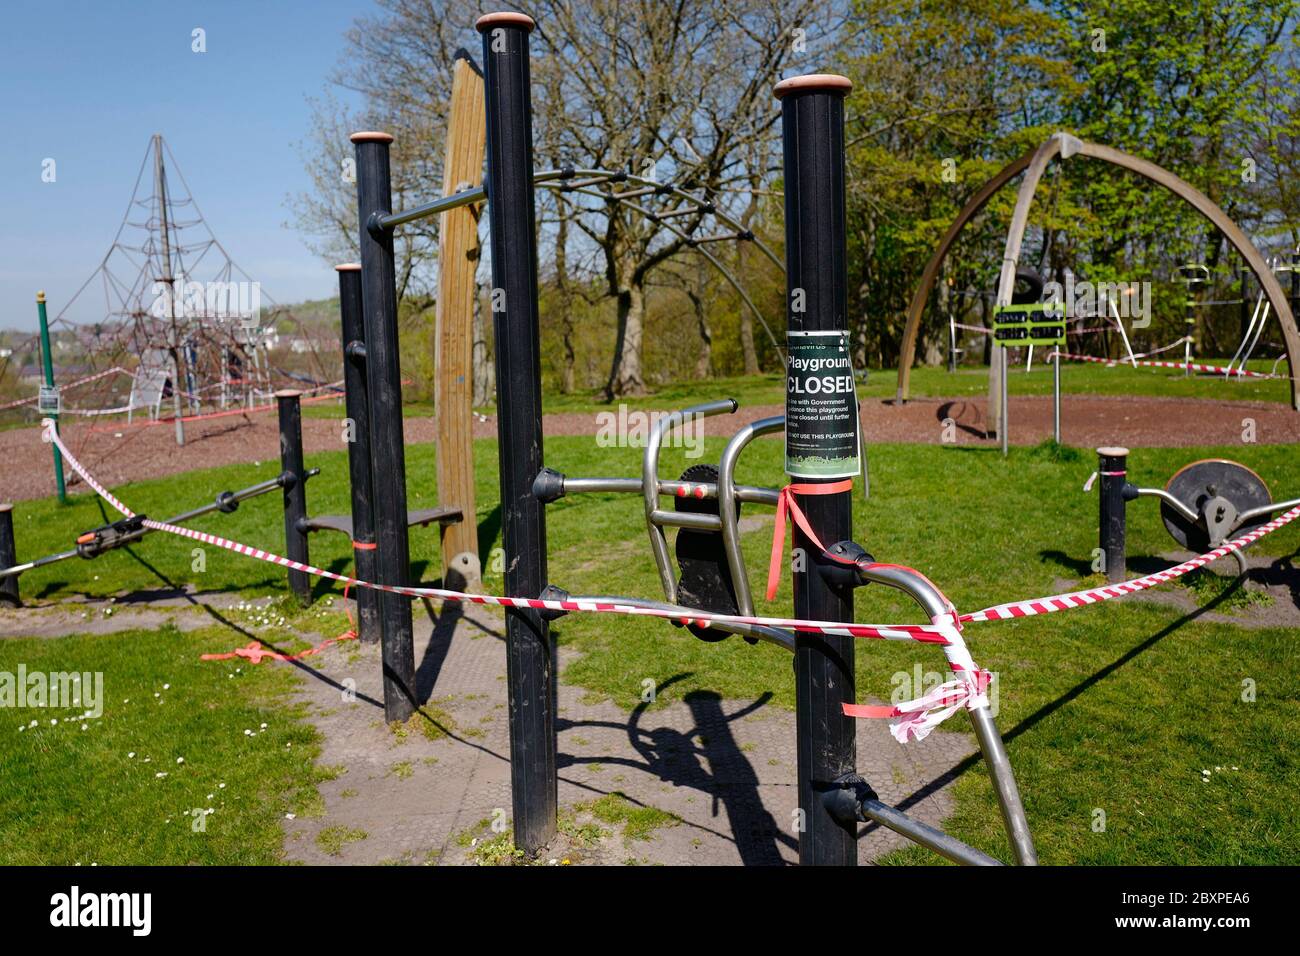 A playground remains closed during the Covid-19 pandemic in Manchester, UK Stock Photo